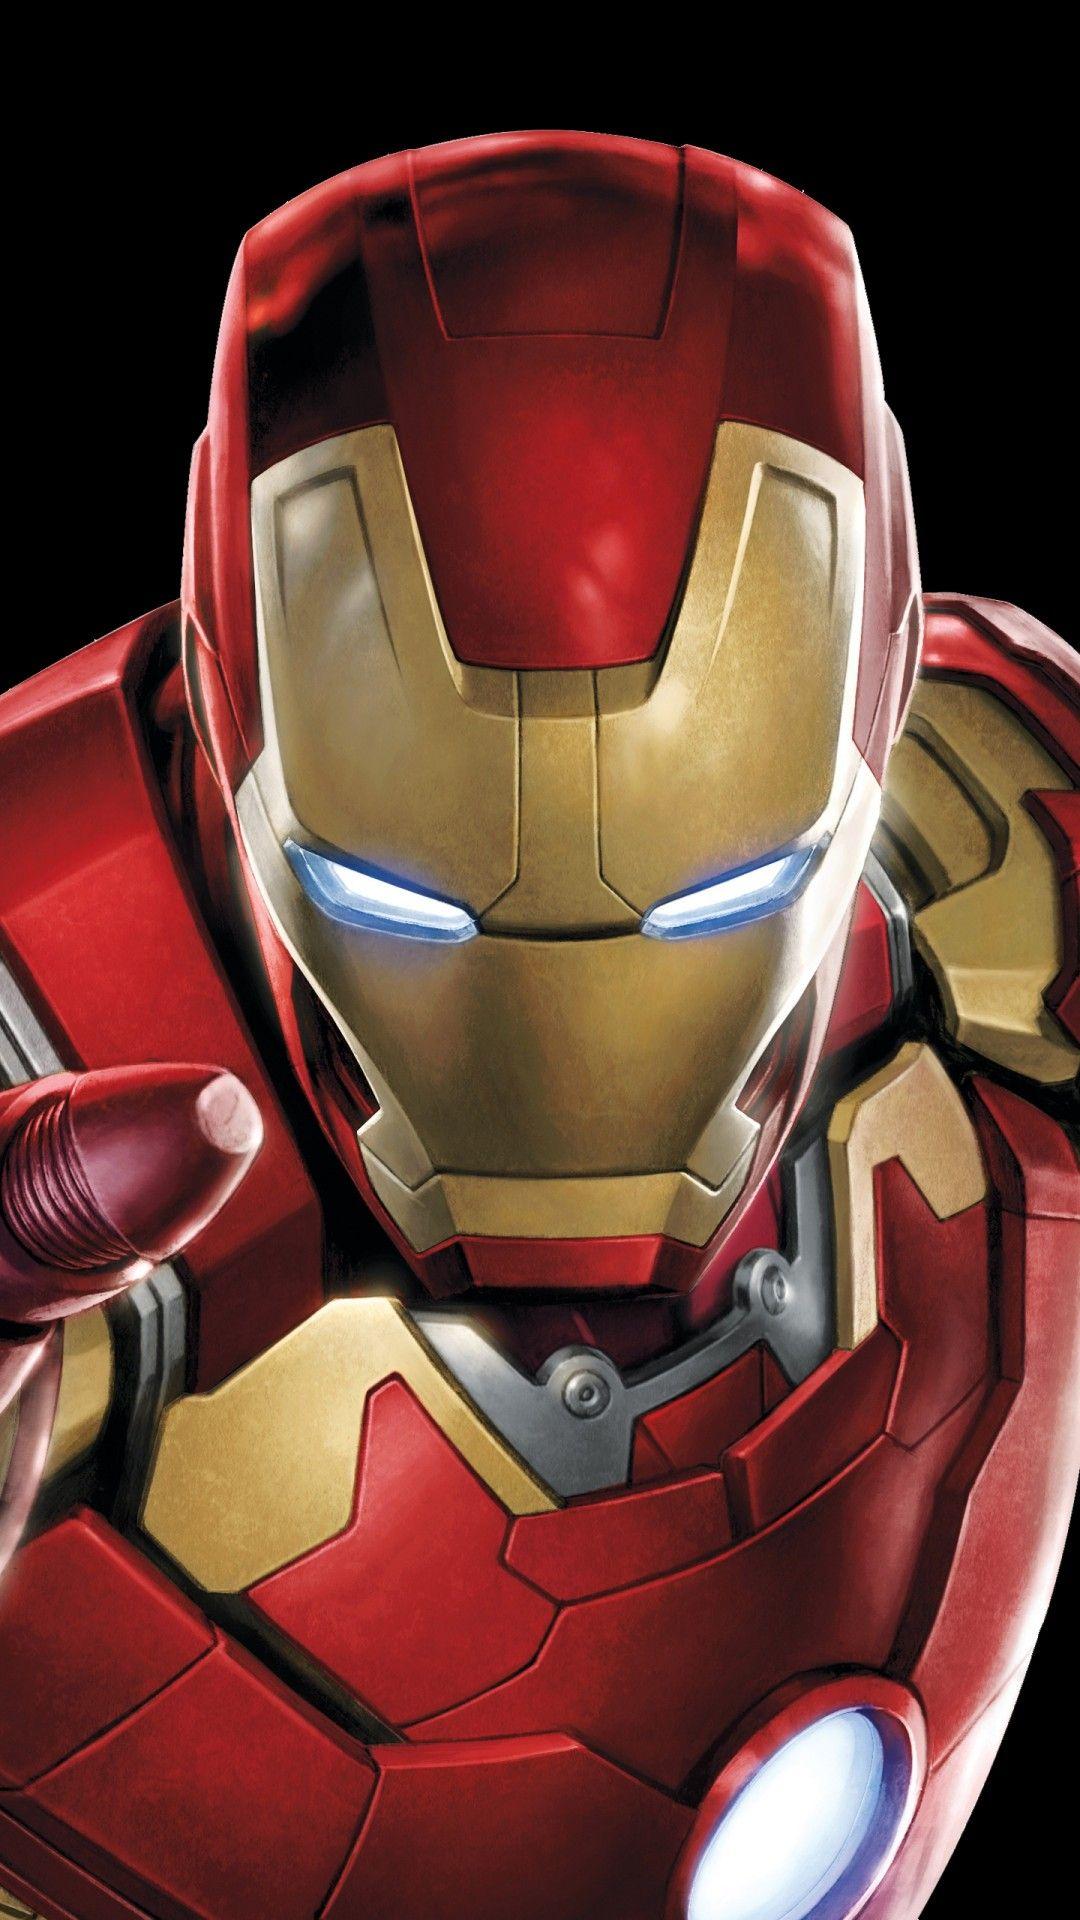 Download 1080x1920 Iron Man, Armor Wallpapers for iPhone 8, iPhone 7